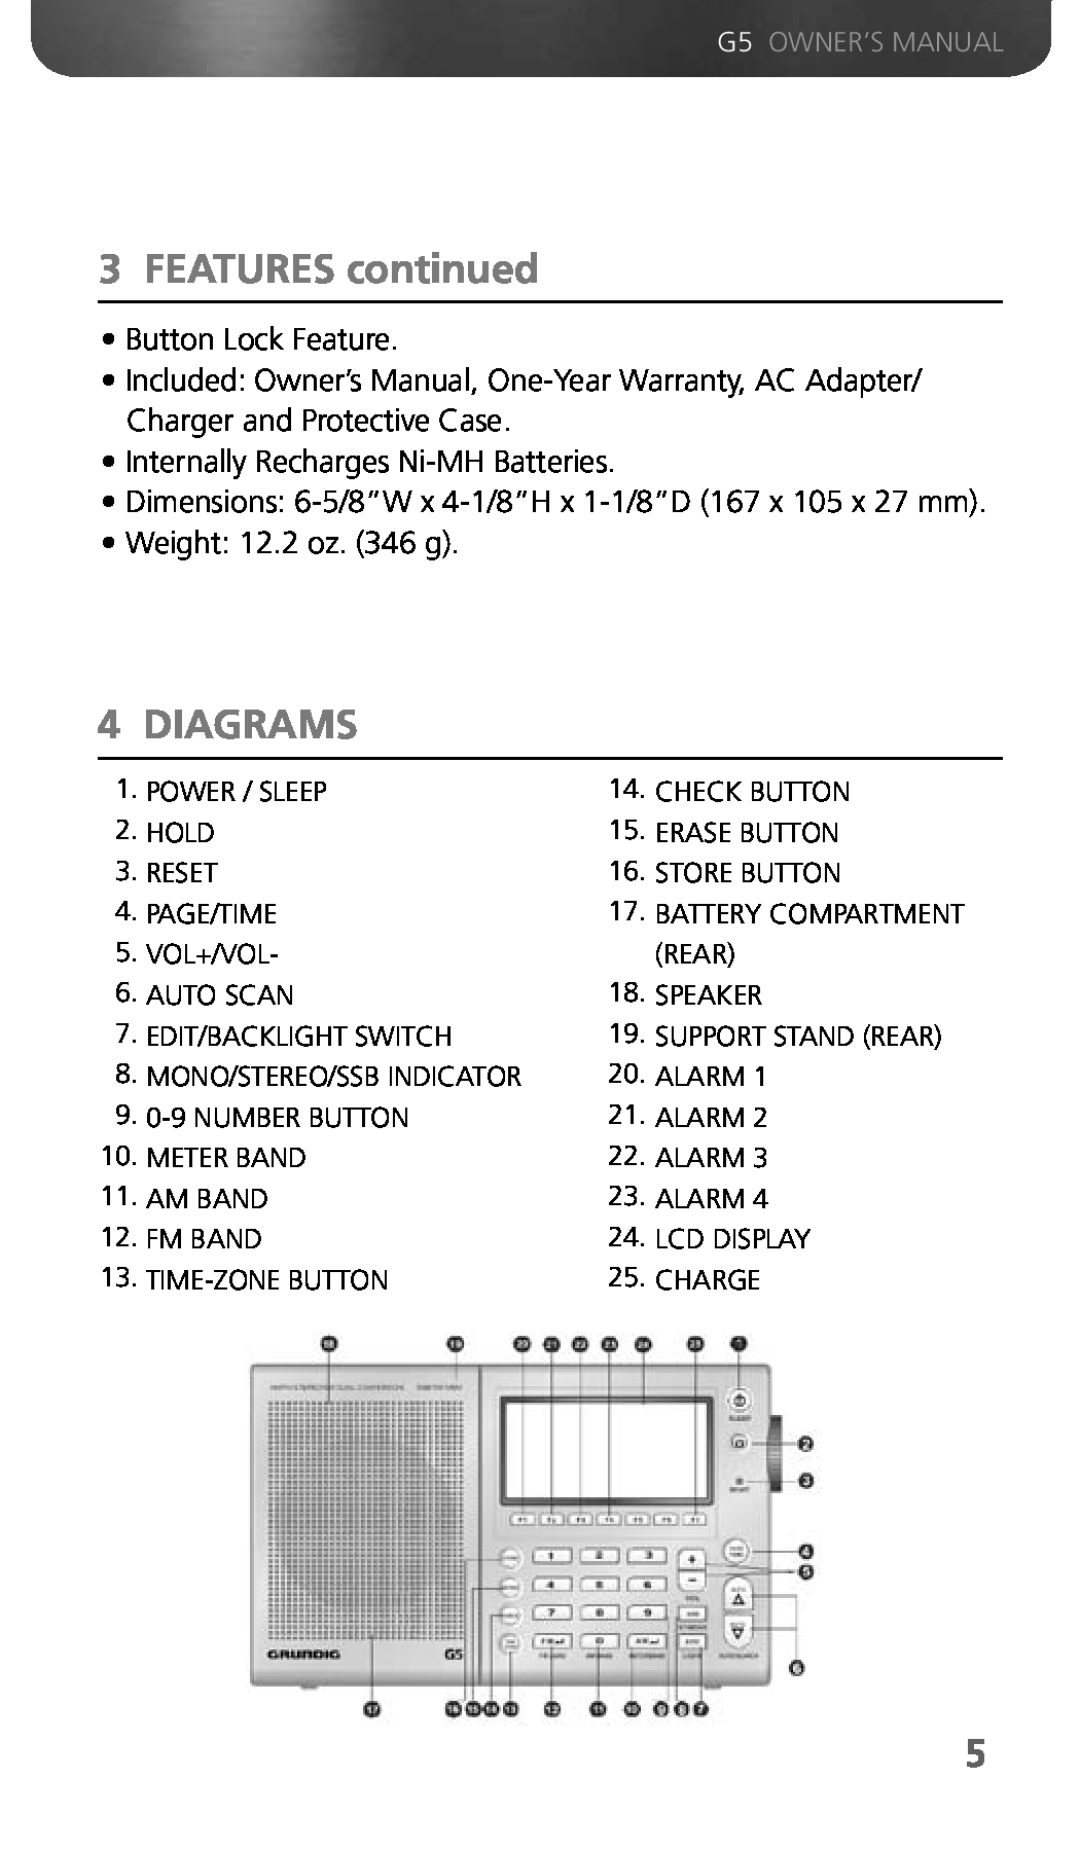 Eton G5 owner manual FEATURES continued, Diagrams 